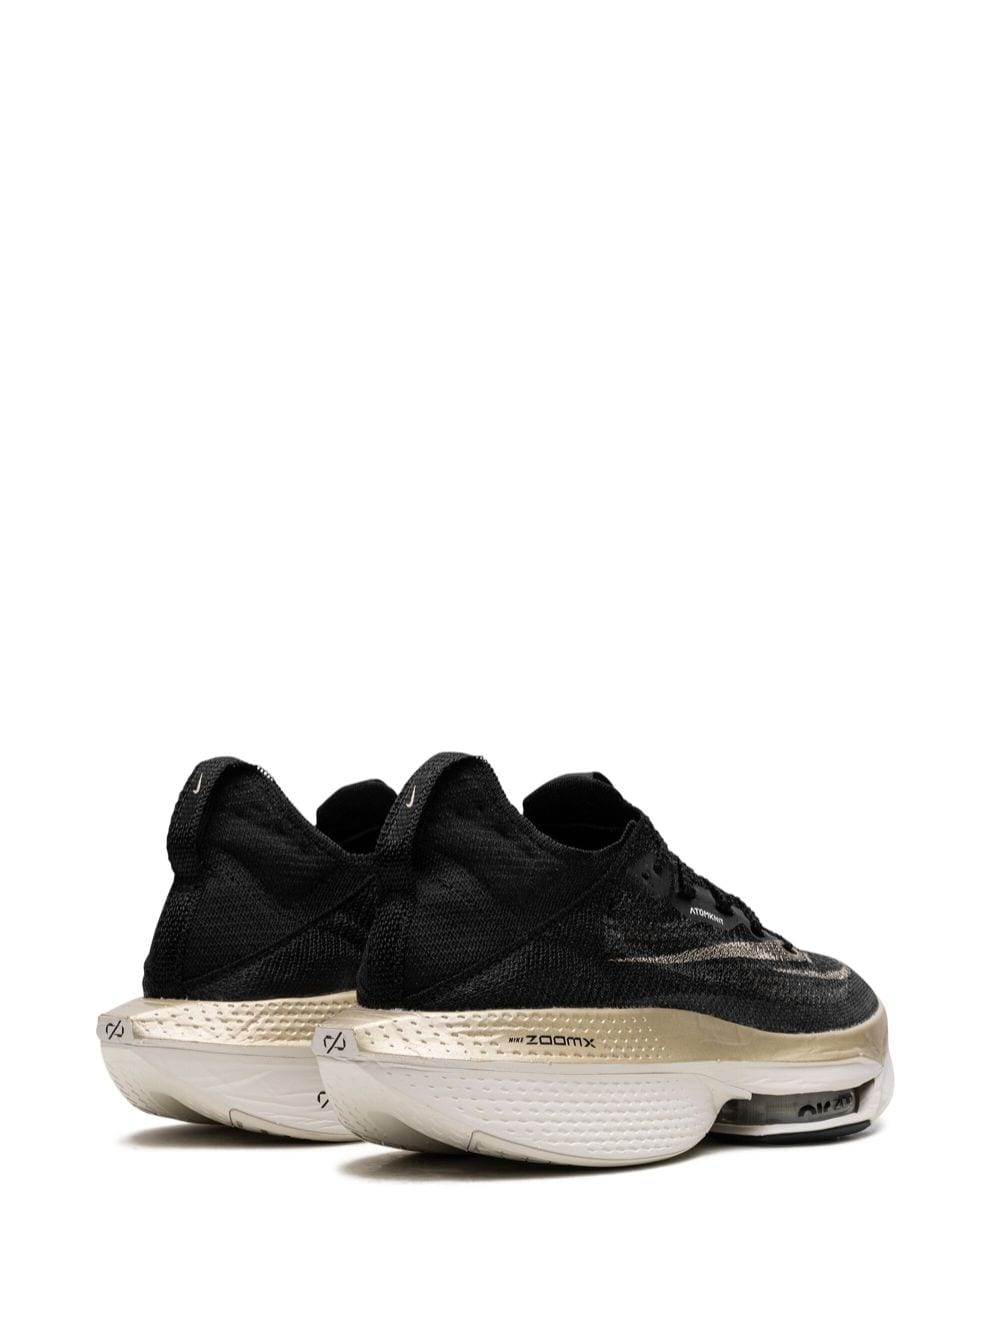 Shop Nike Zoom Alphafly Next% 2 "black Gold" Sneakers